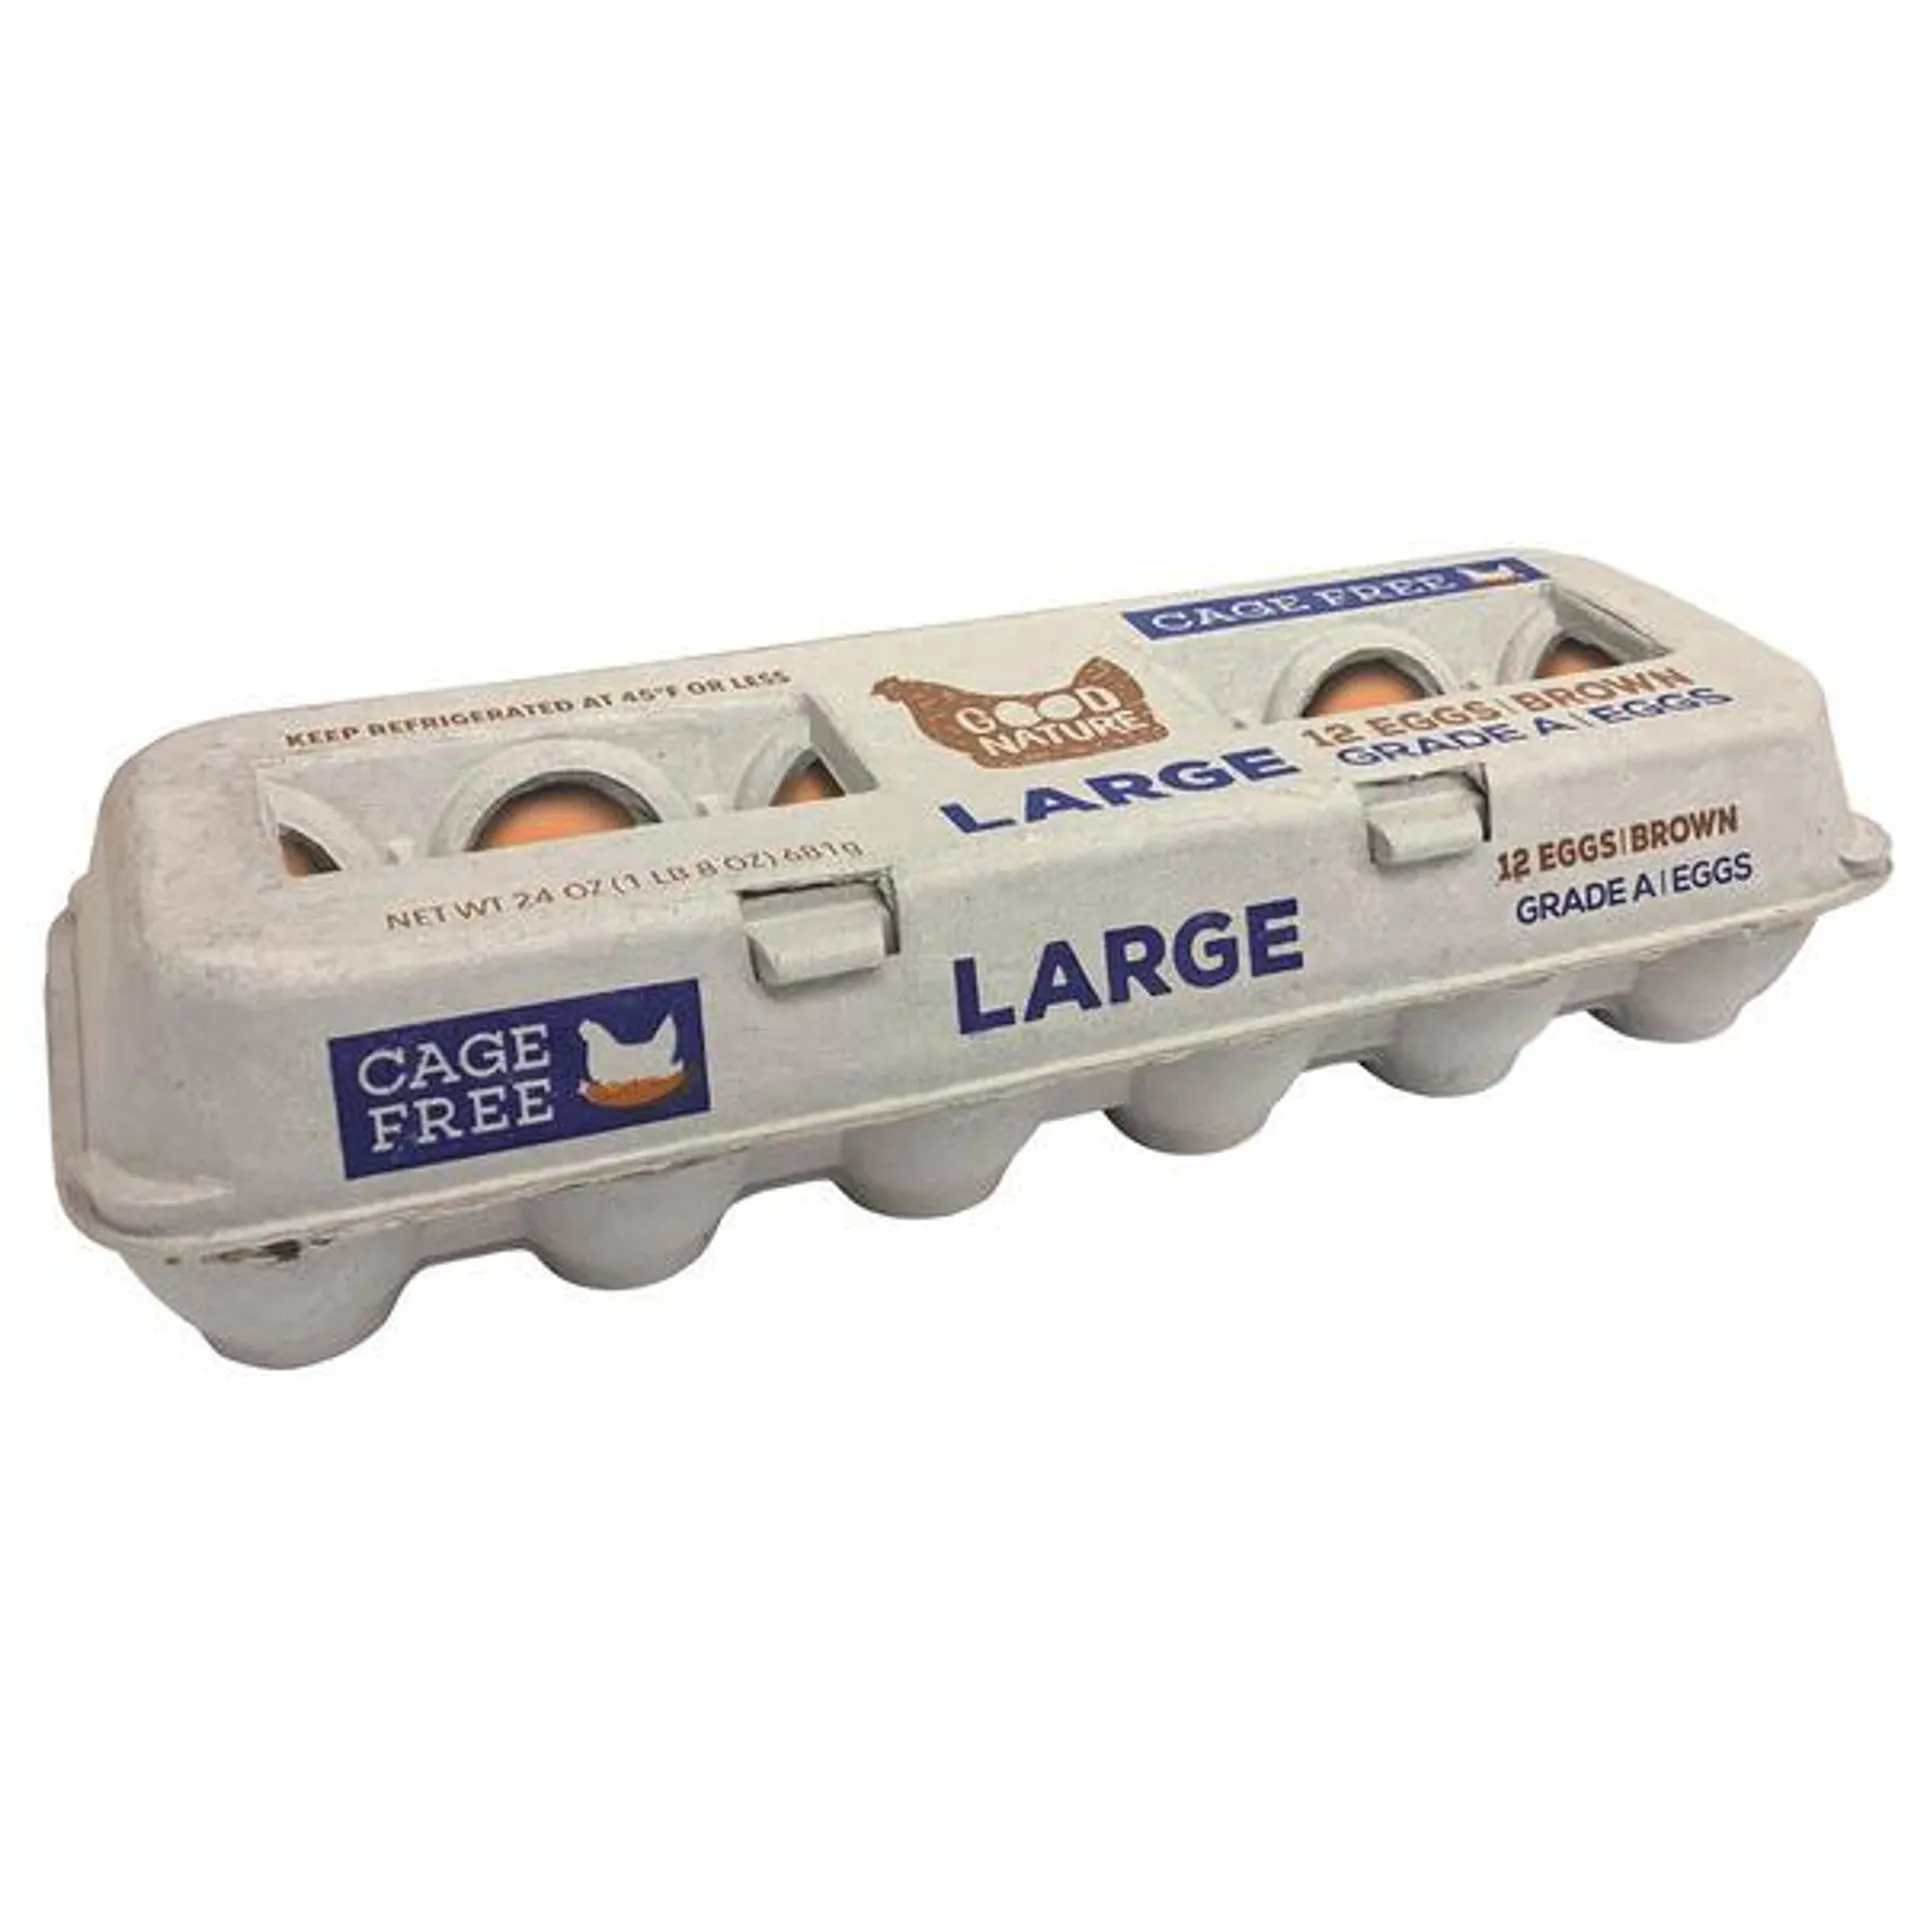 Good Natured Selects Cage Free Large Eggs